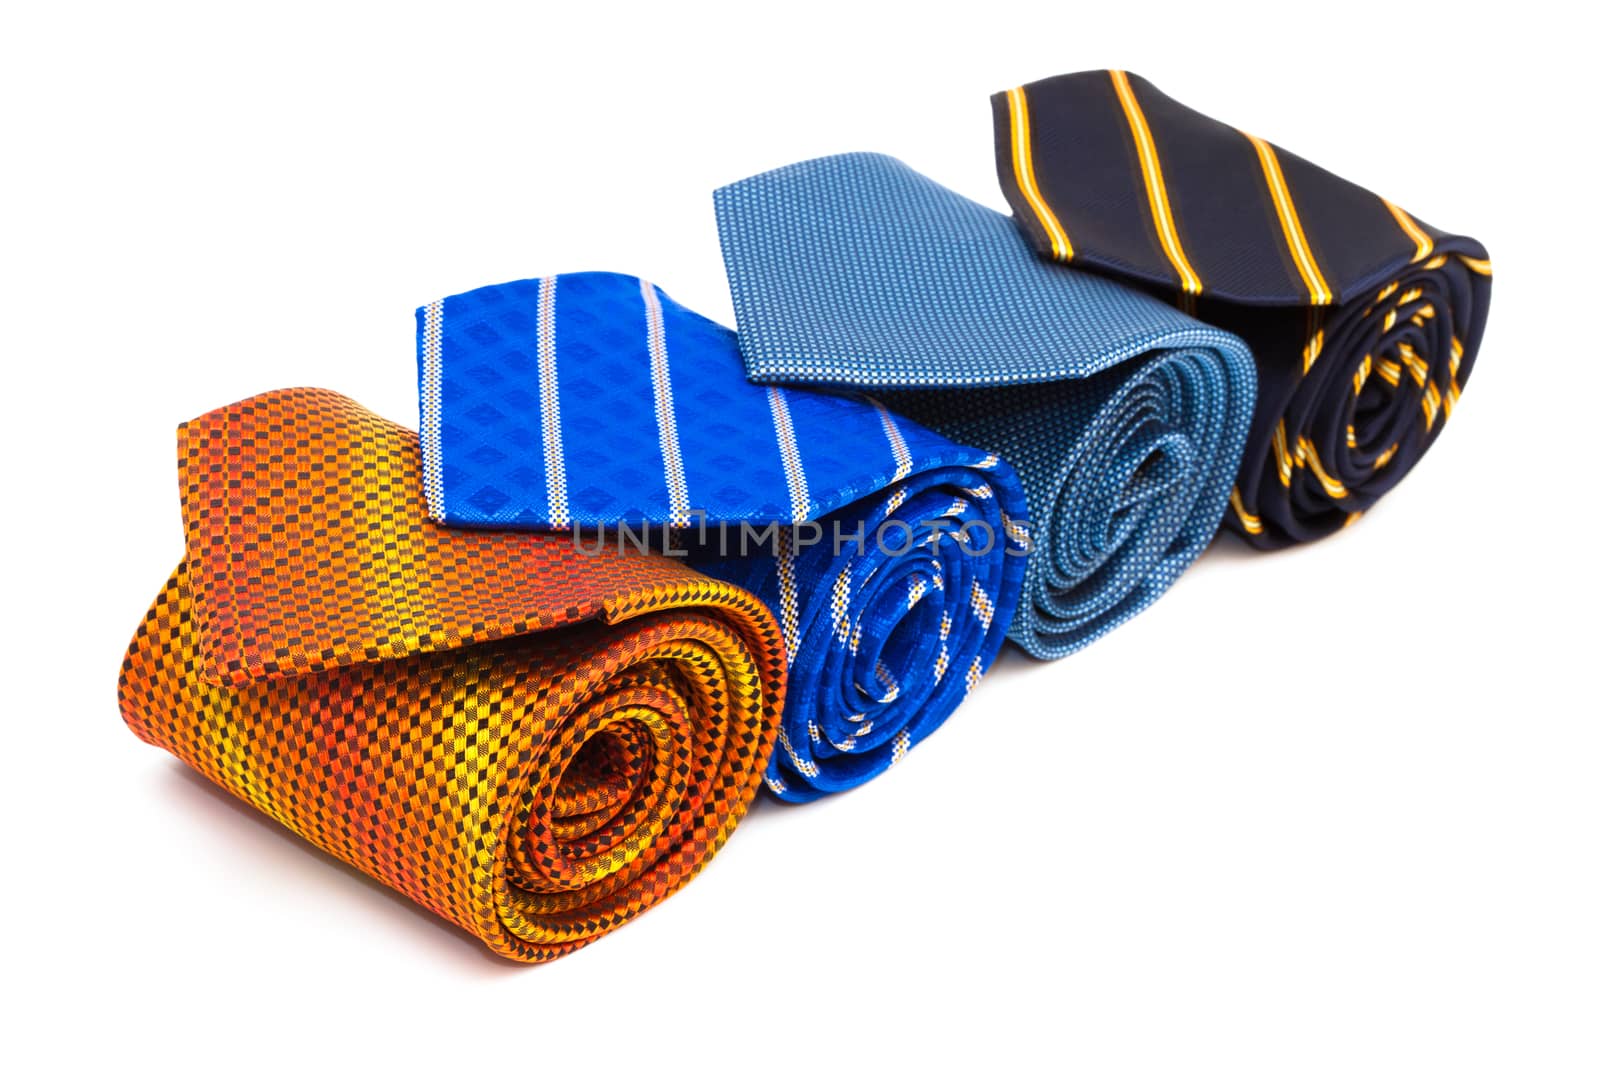 bright and fashionable ties by terex